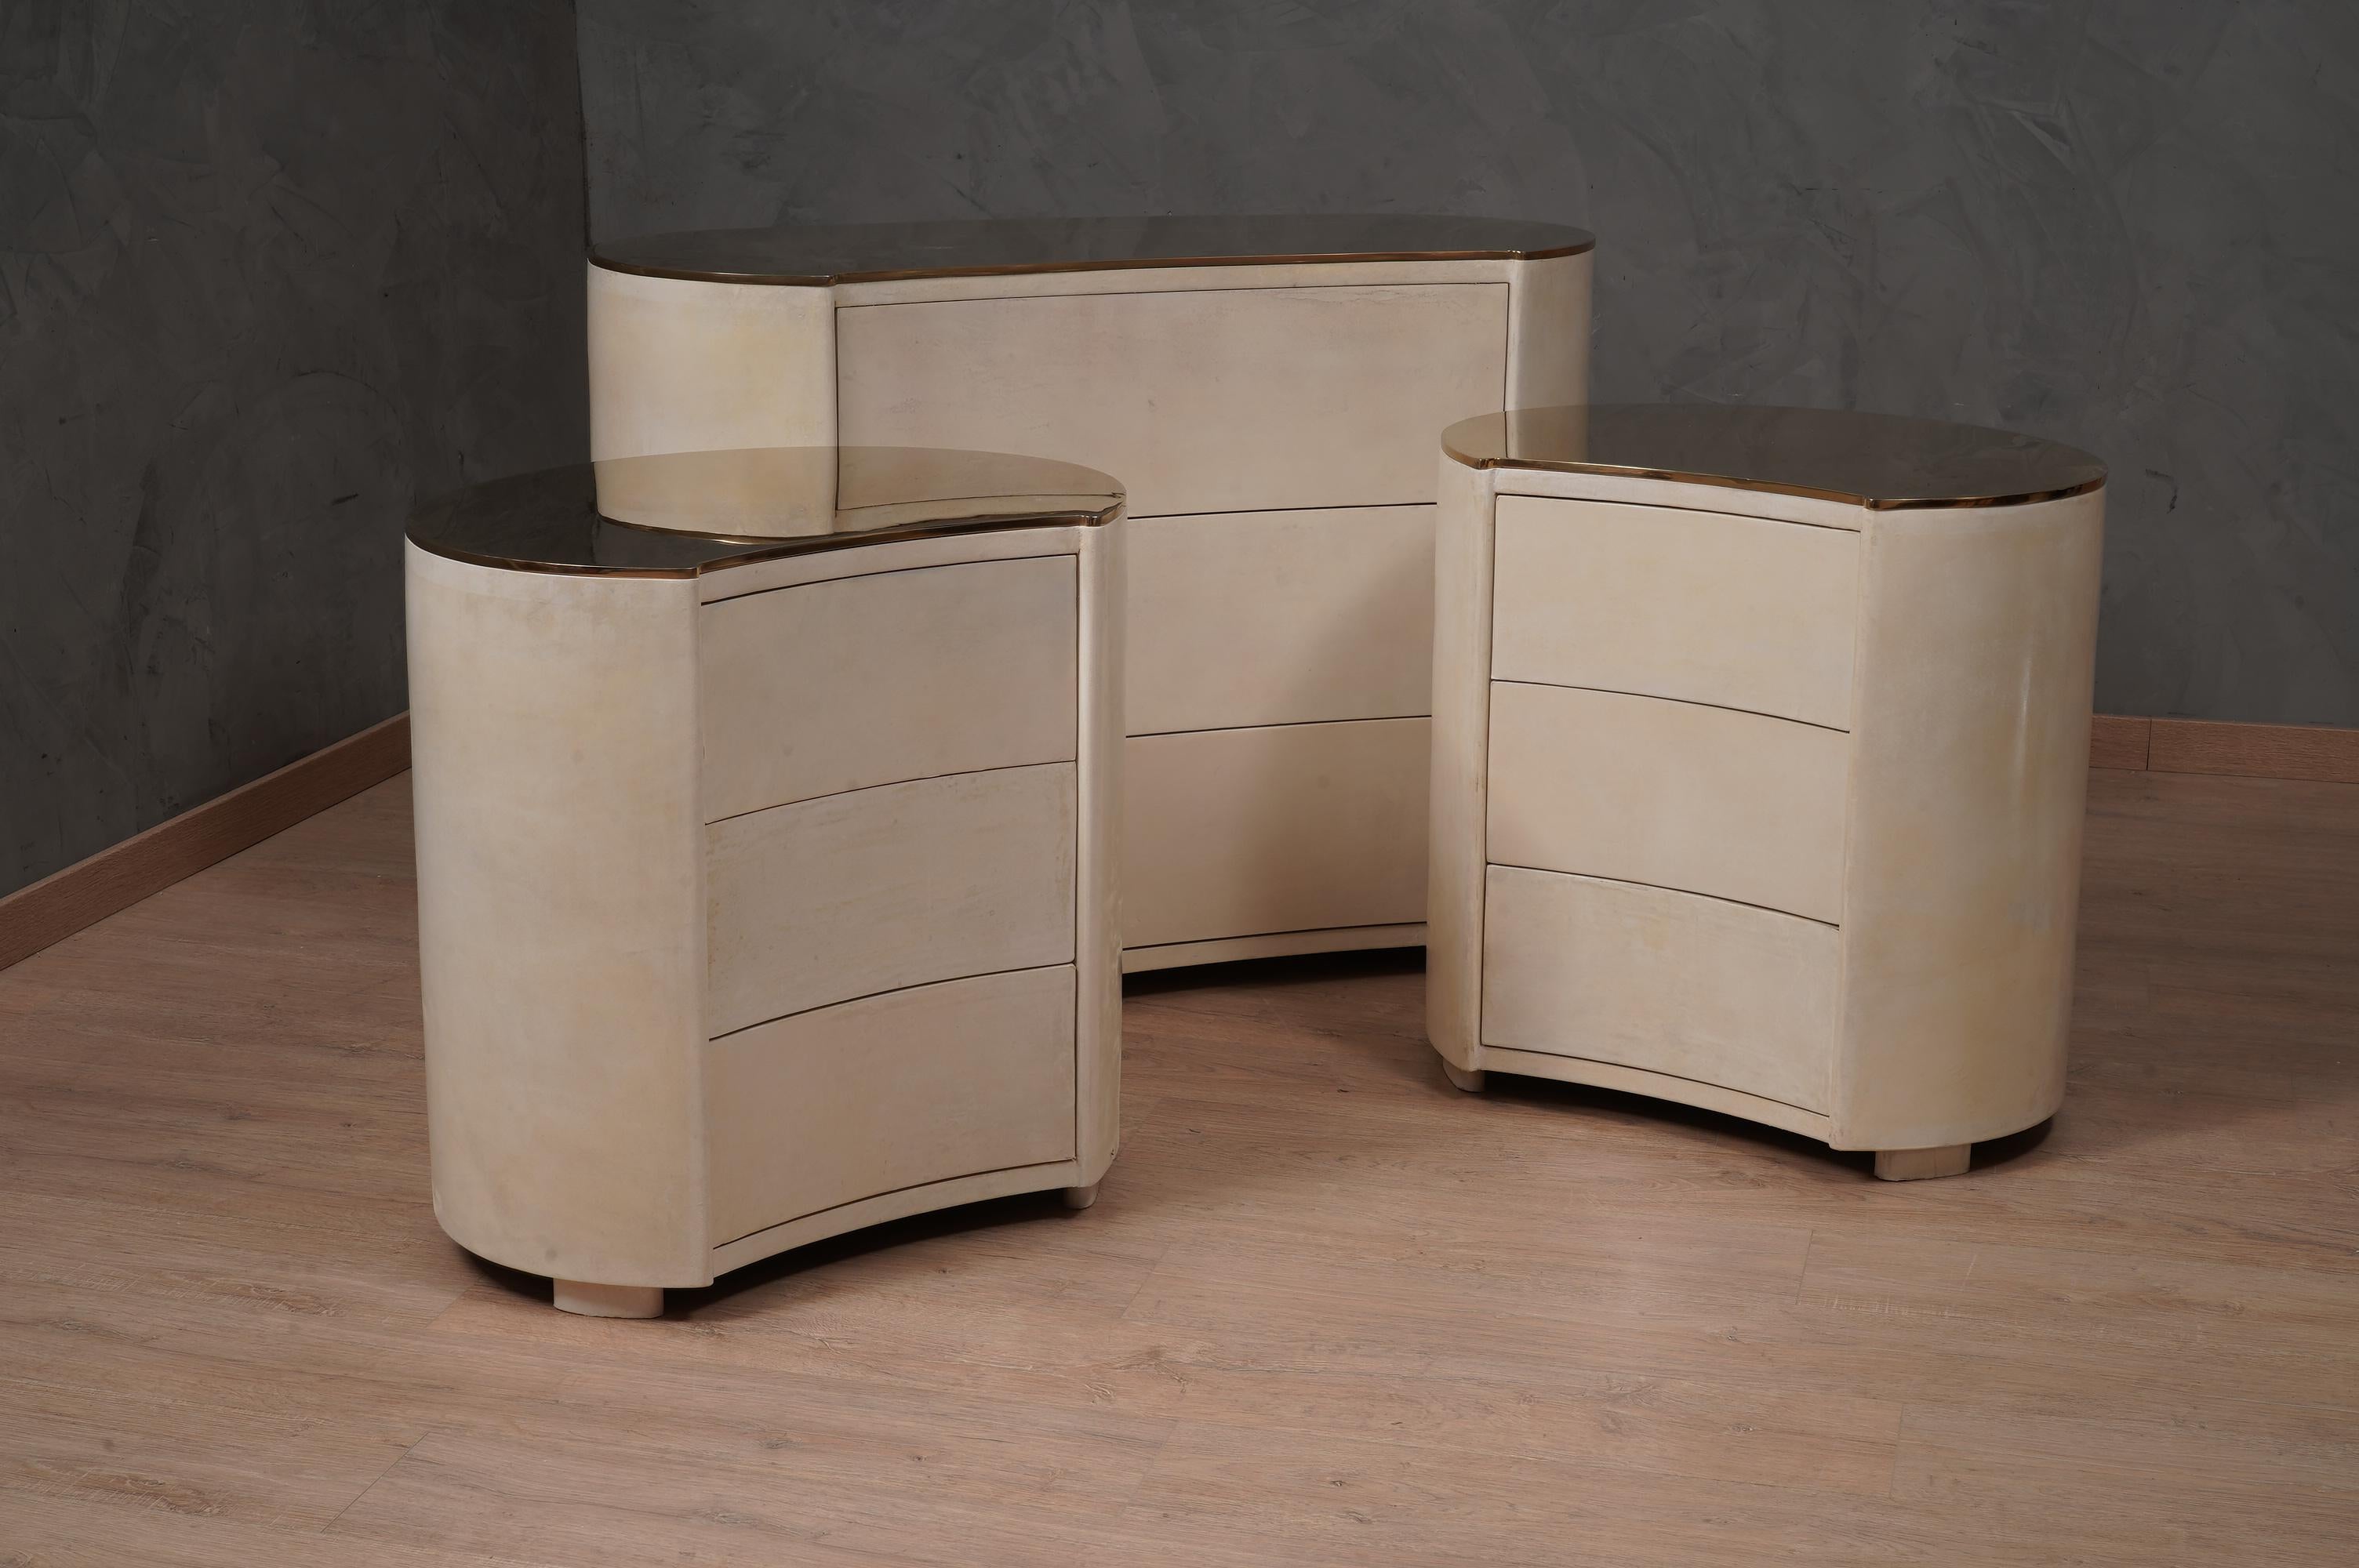 Refinement and style characterize this big night stand, a very charismatic design makes the commode truly elegant. In true mid-century Italian style. A fine and distinct taste.

The night stands has a very particular design, its rounded shape allows